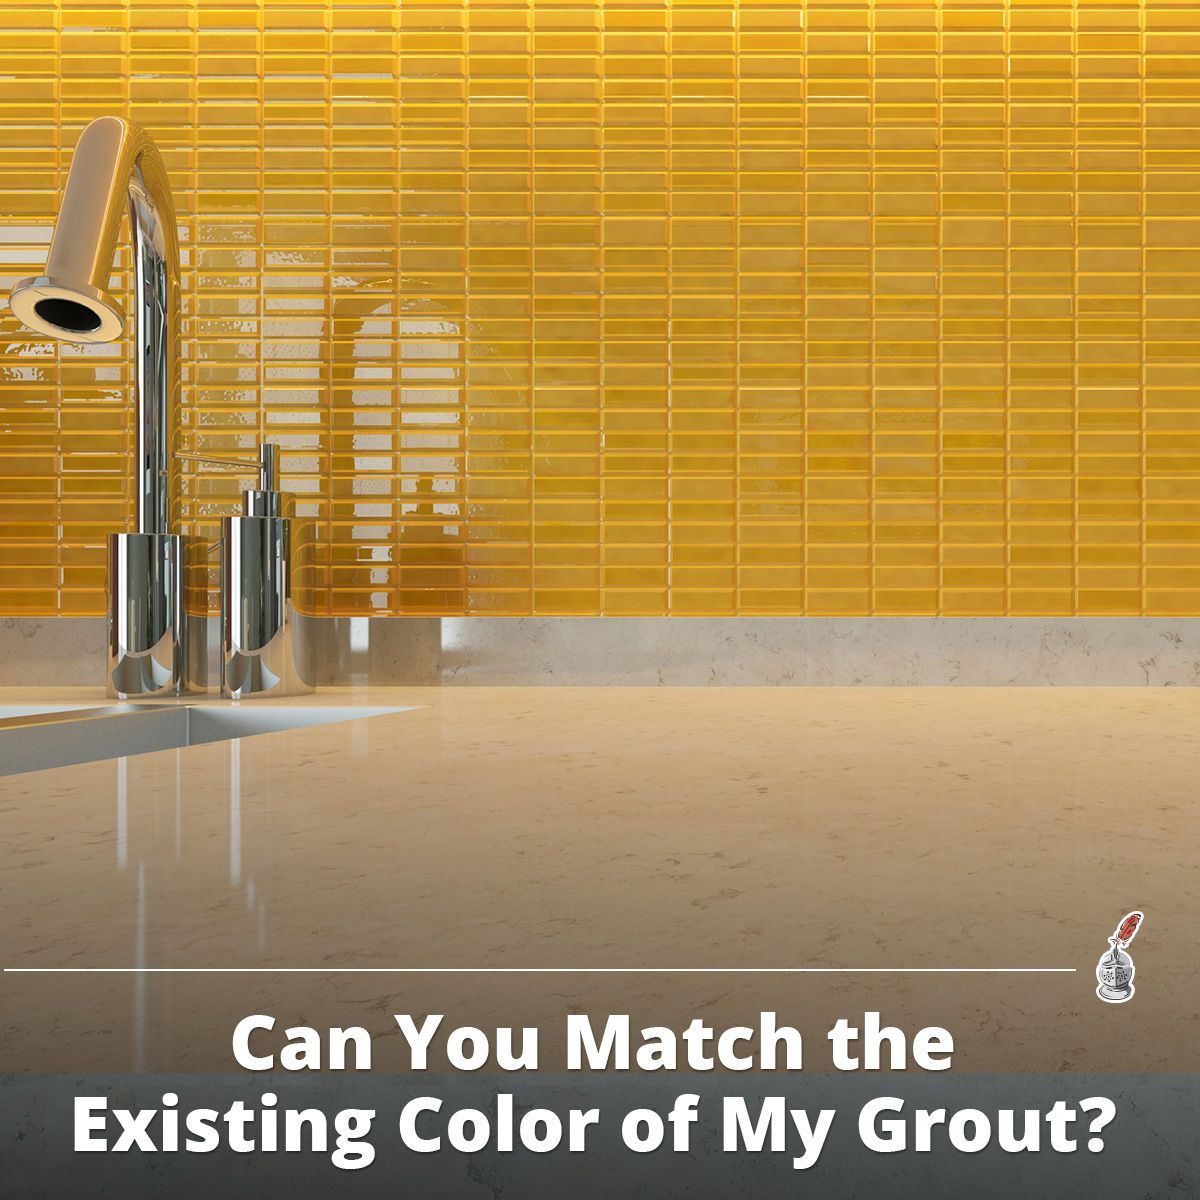 Can You Match the Existing Color of My Grout?